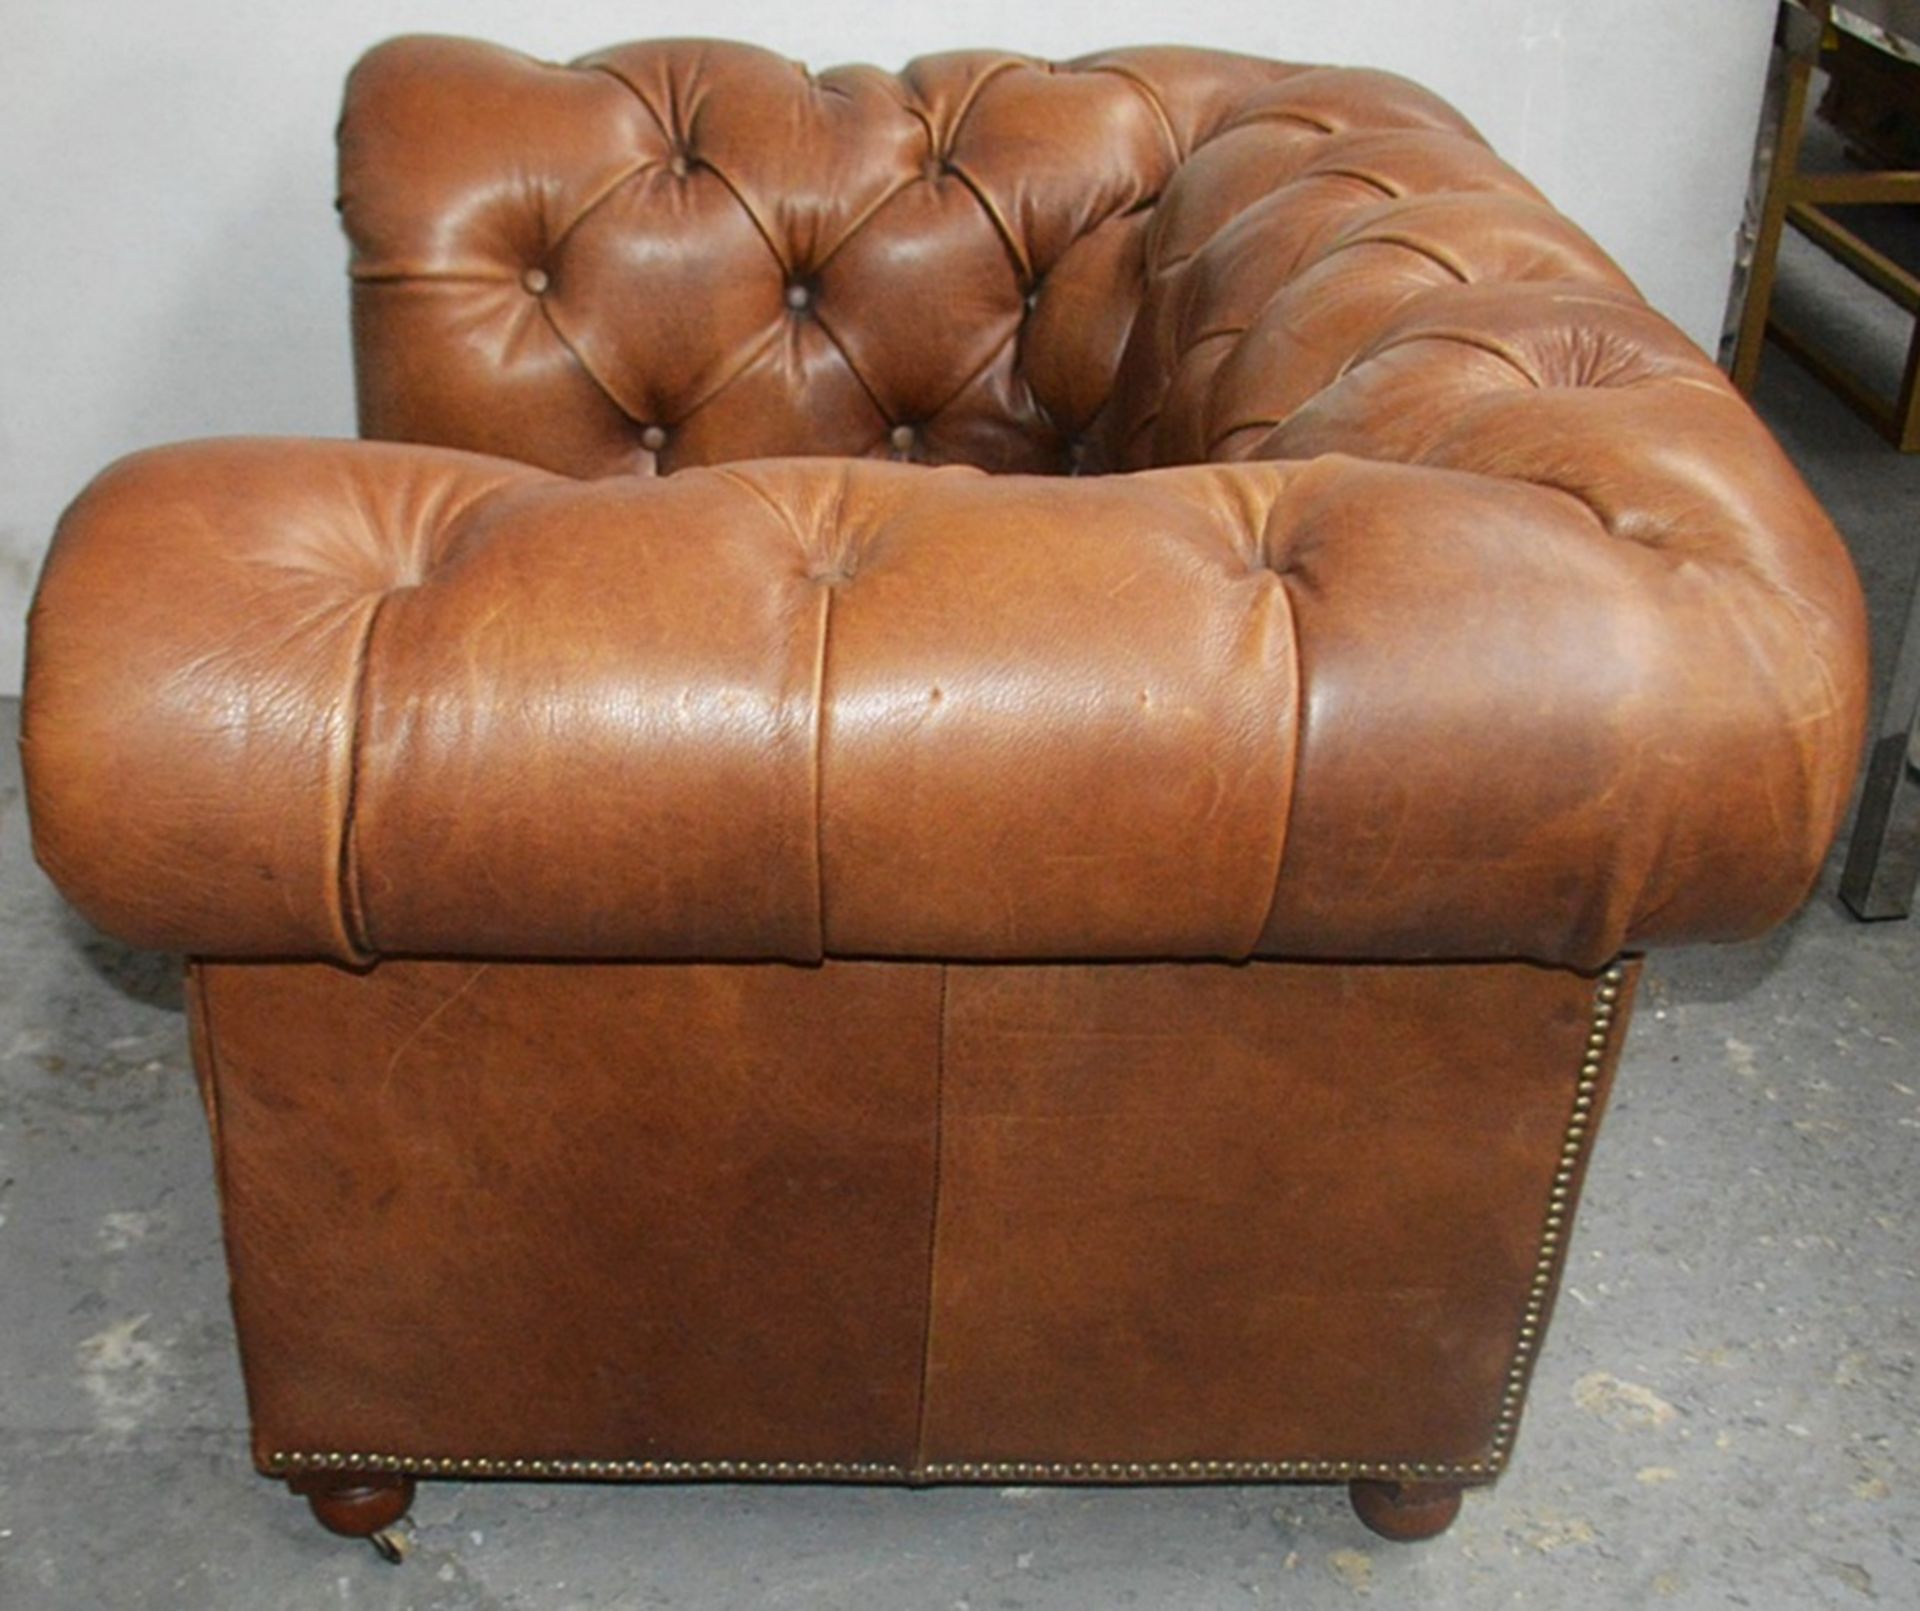 1 x Vintage-style Large Leather Chesterfield Armchair Featuring A Distressed Finish - Image 4 of 6